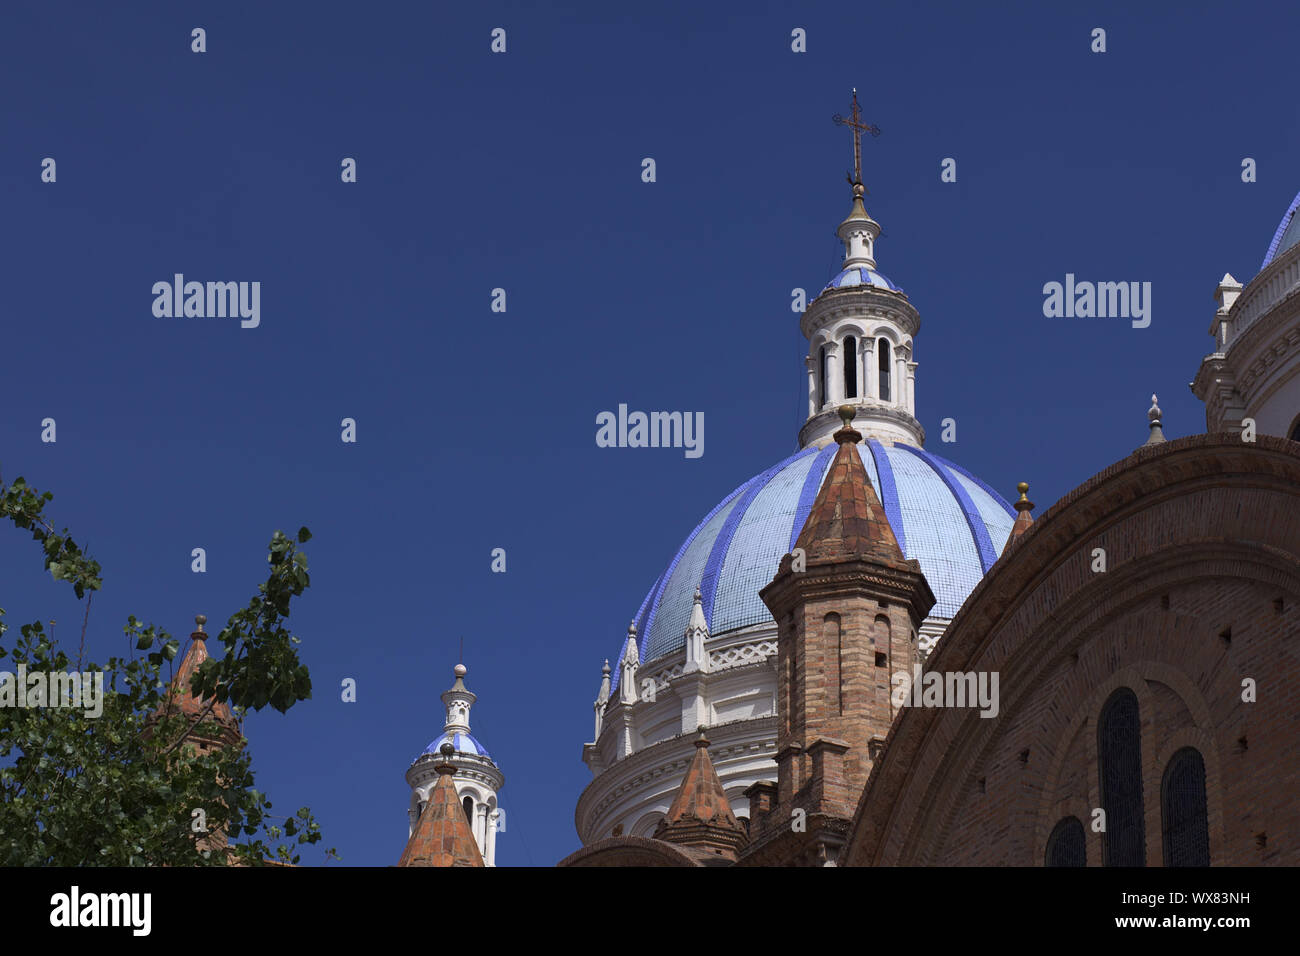 CUENCA, ECUADOR - FEBRUARY 13, 2014: Blue-colored dome of the Cathedral of the Immaculate Conception (commonly known as the New Cathedral) Stock Photo